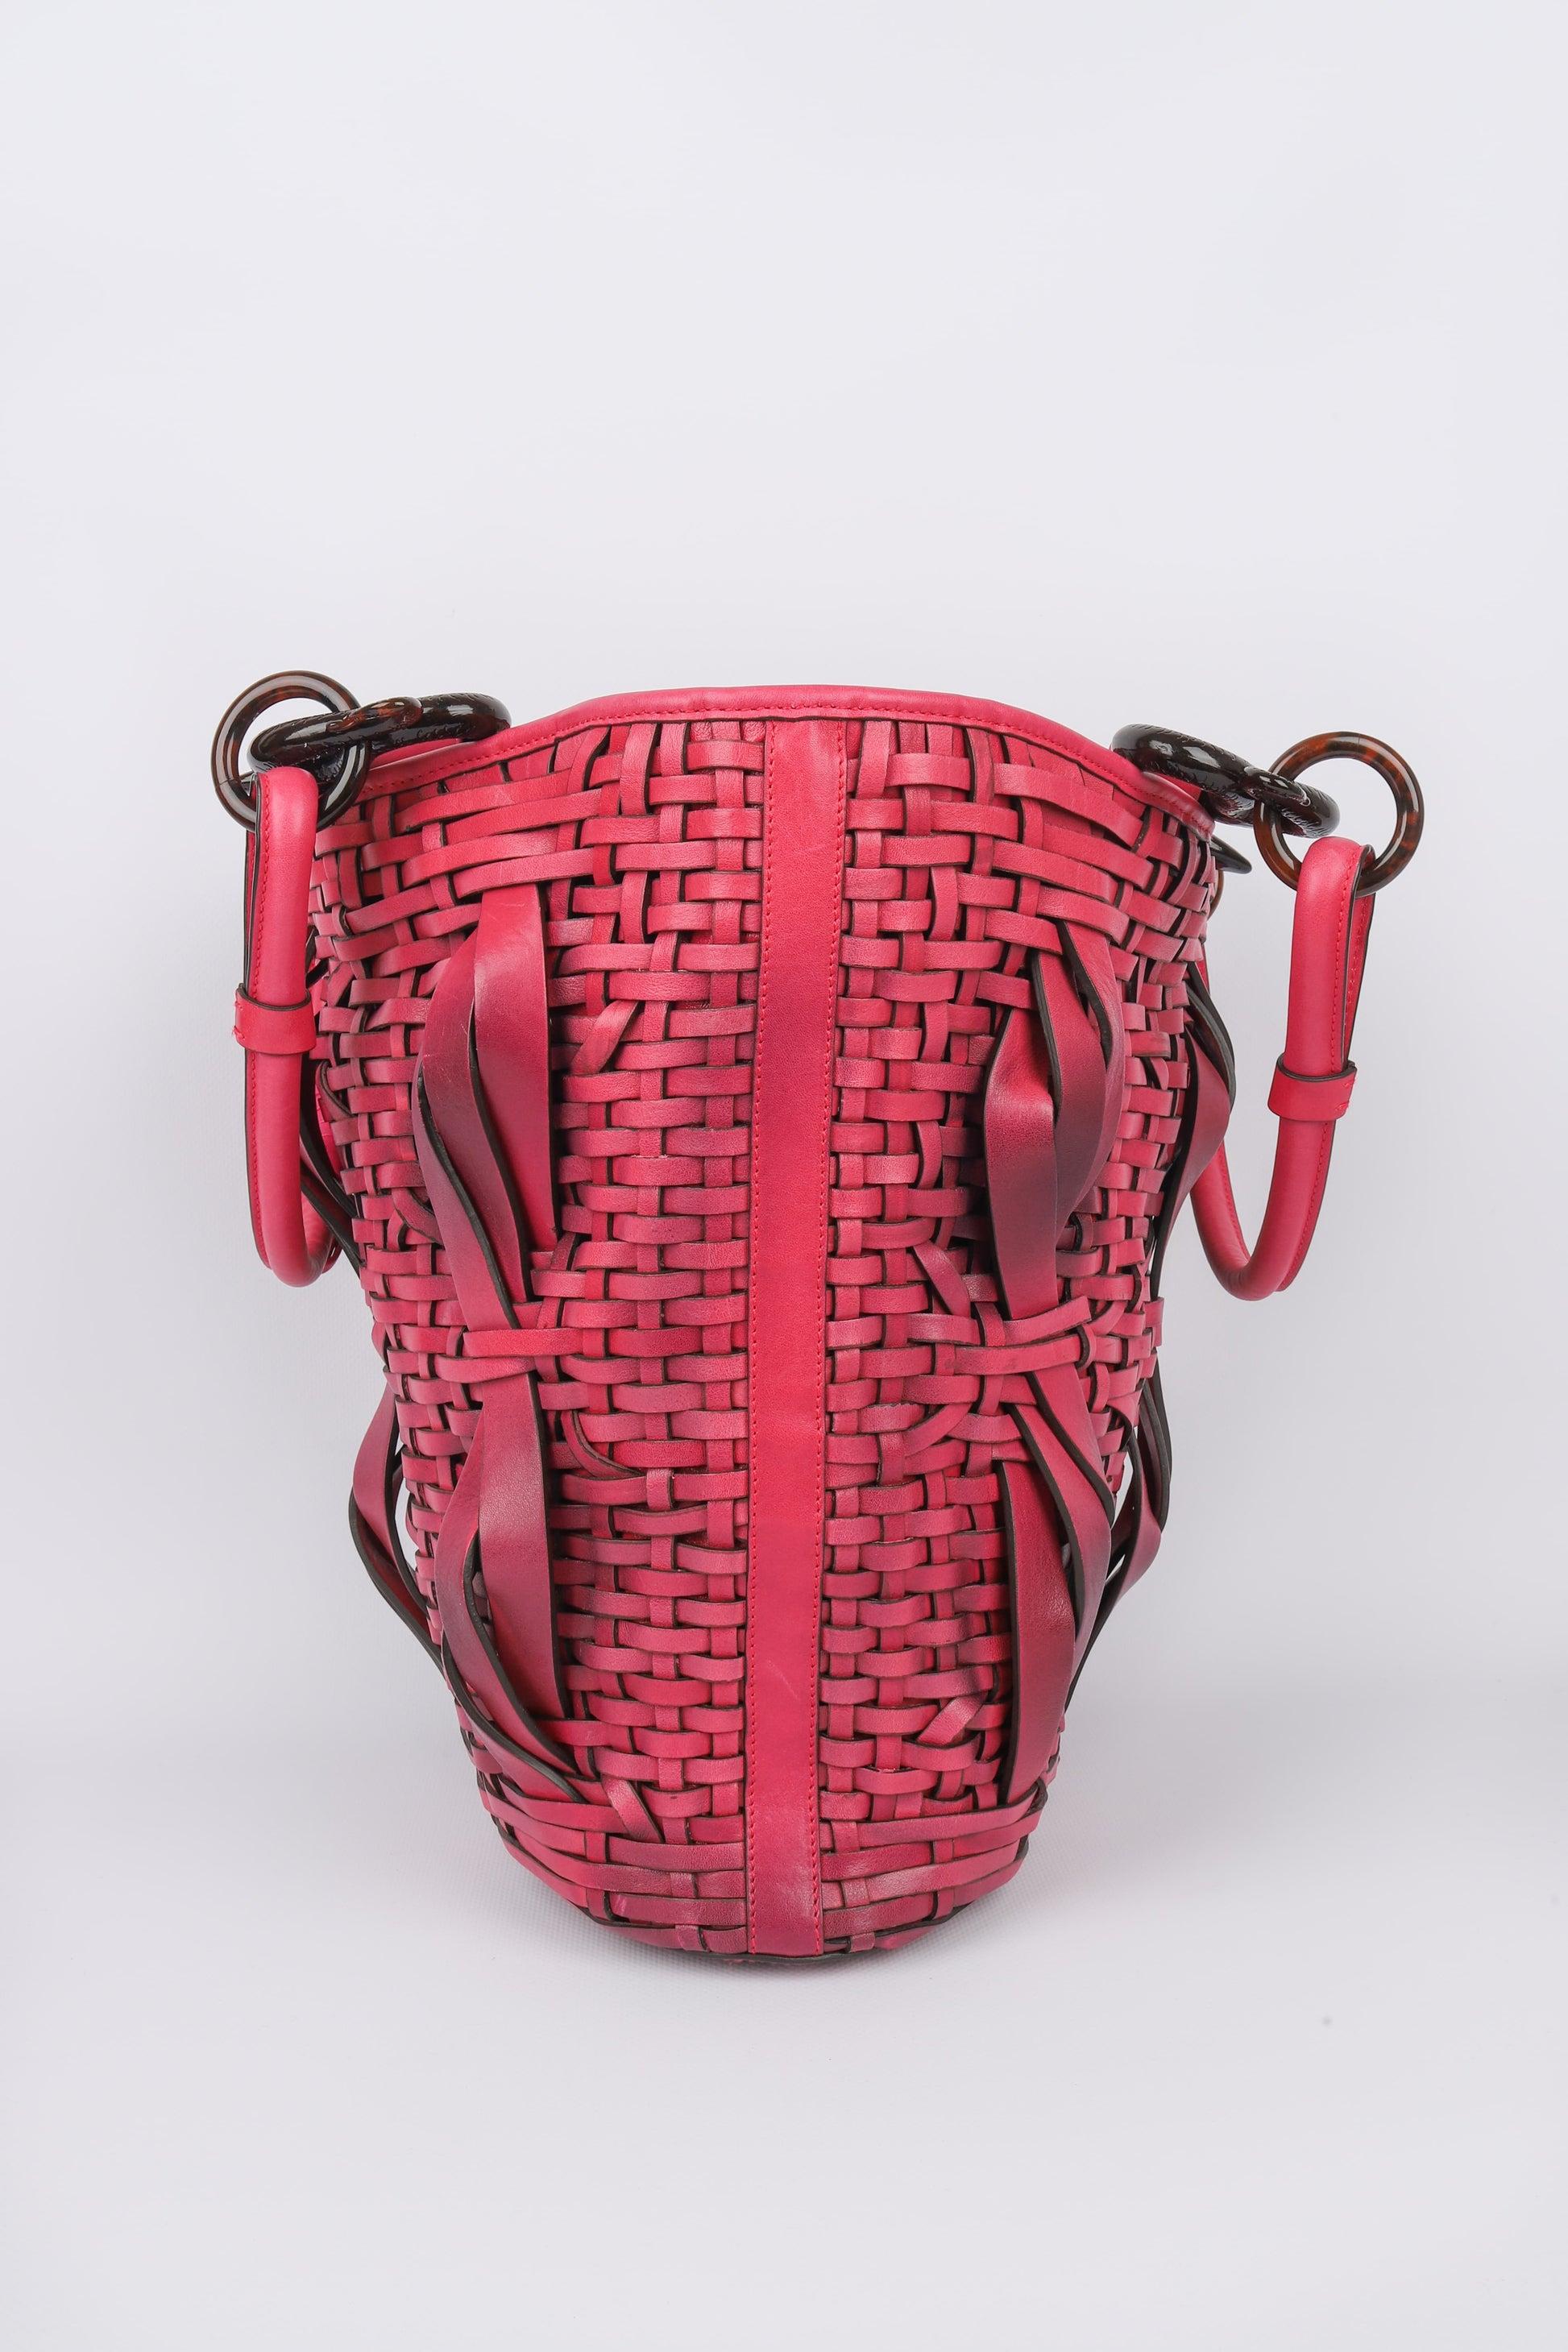 Dior - (Made in Italy) Bakelite and pink leather bucket bag. Bag with a serial number. 2007 Fall-Winter Collection.

Additional information:
Condition: Very good condition
Dimensions: Height: 31 cm - Width: 24 cm - Depth: 14 cm - Handle: 50